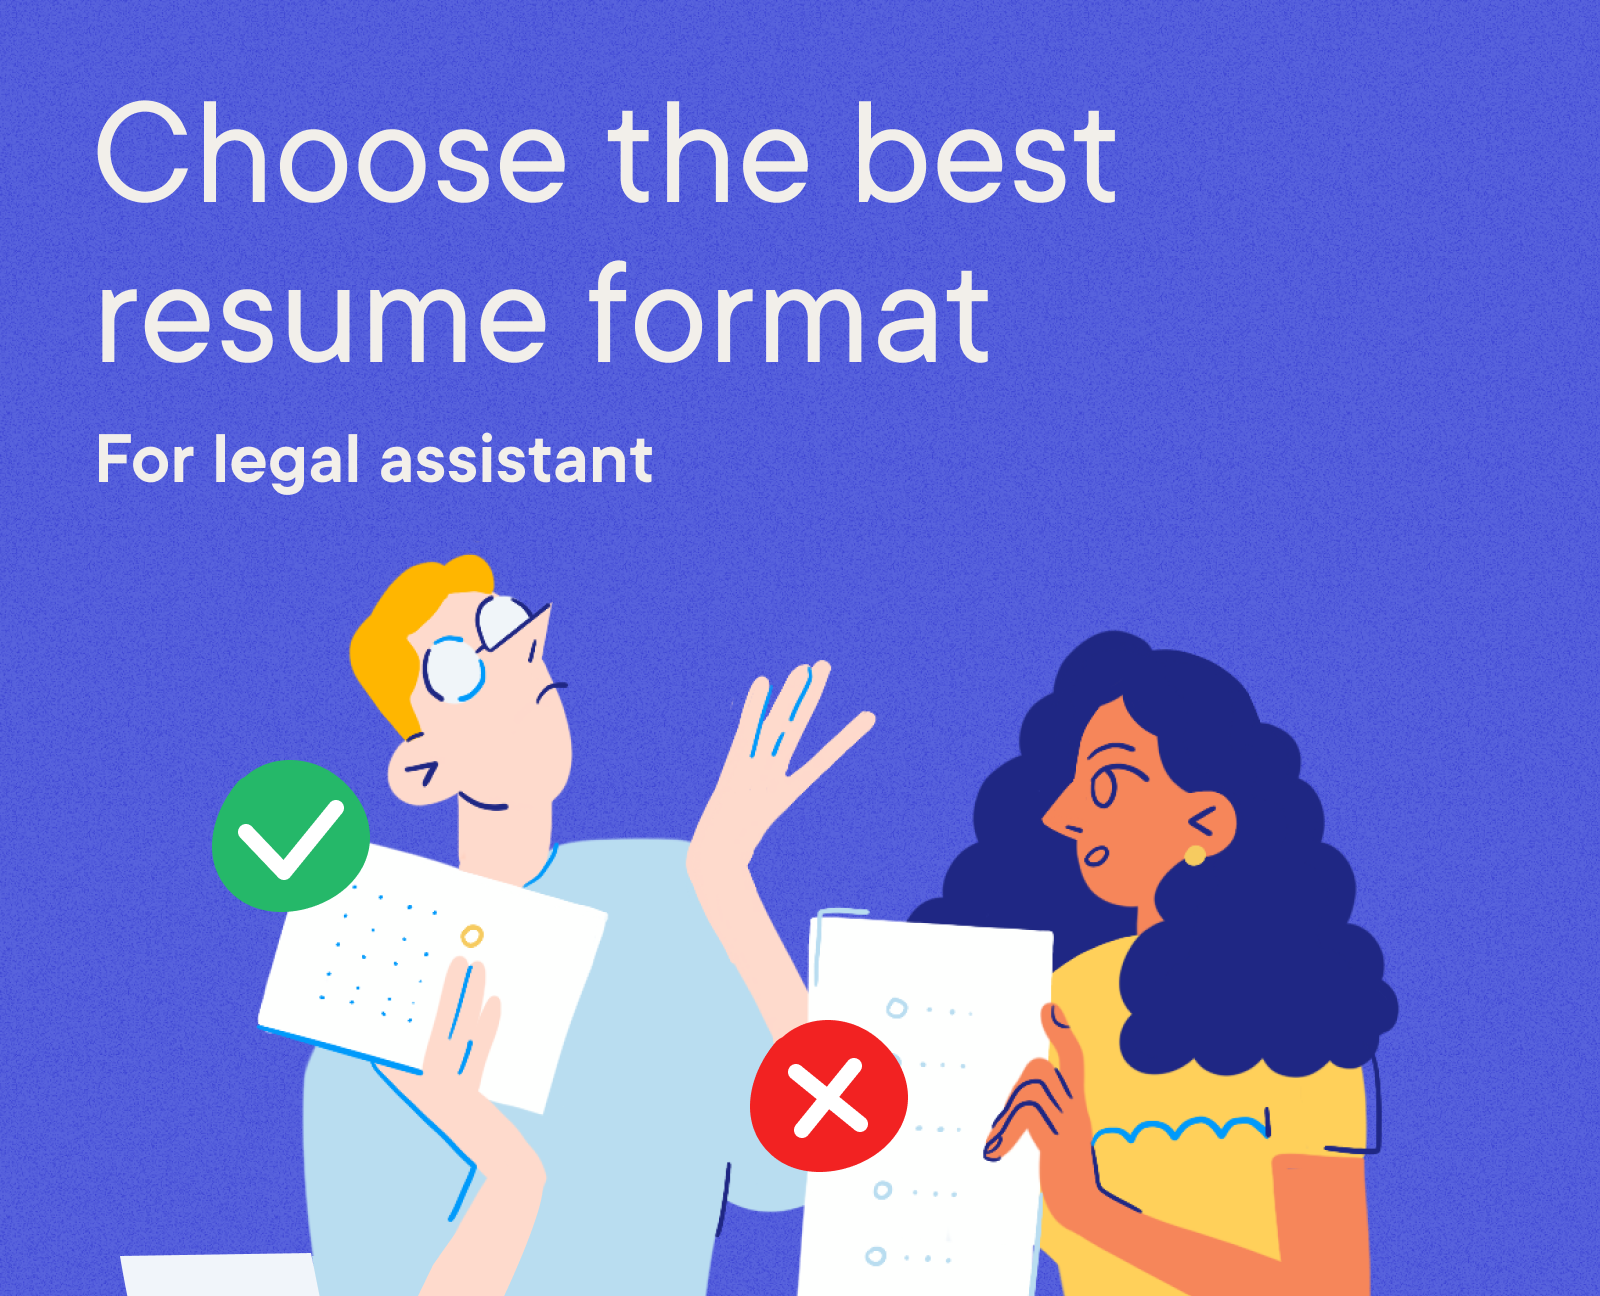 Legal Assistant - Choose the best resume format for legal assistant